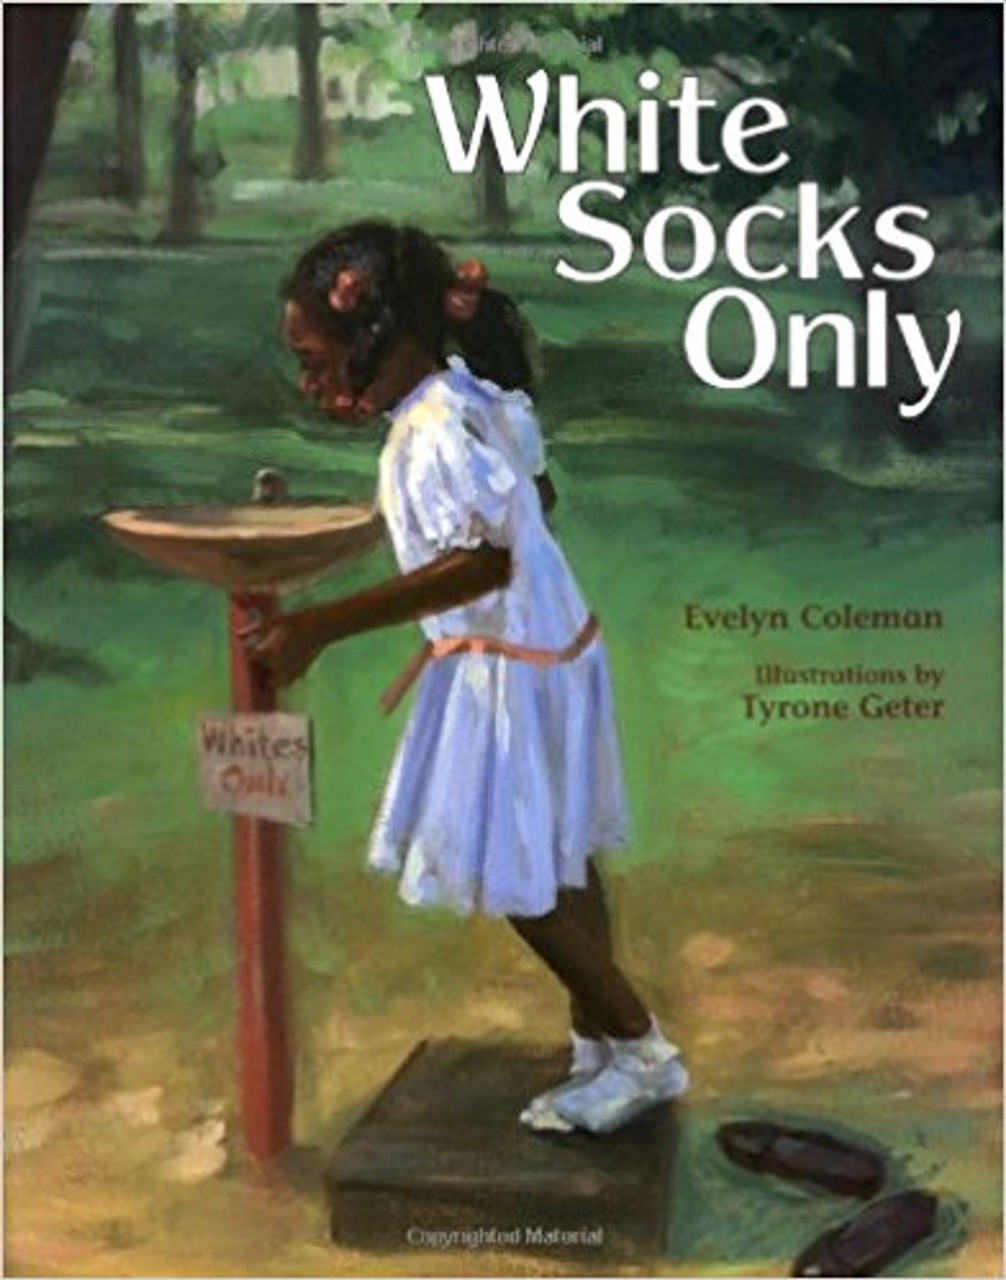 White Socks Only (Paperback) by Evelyn Coleman